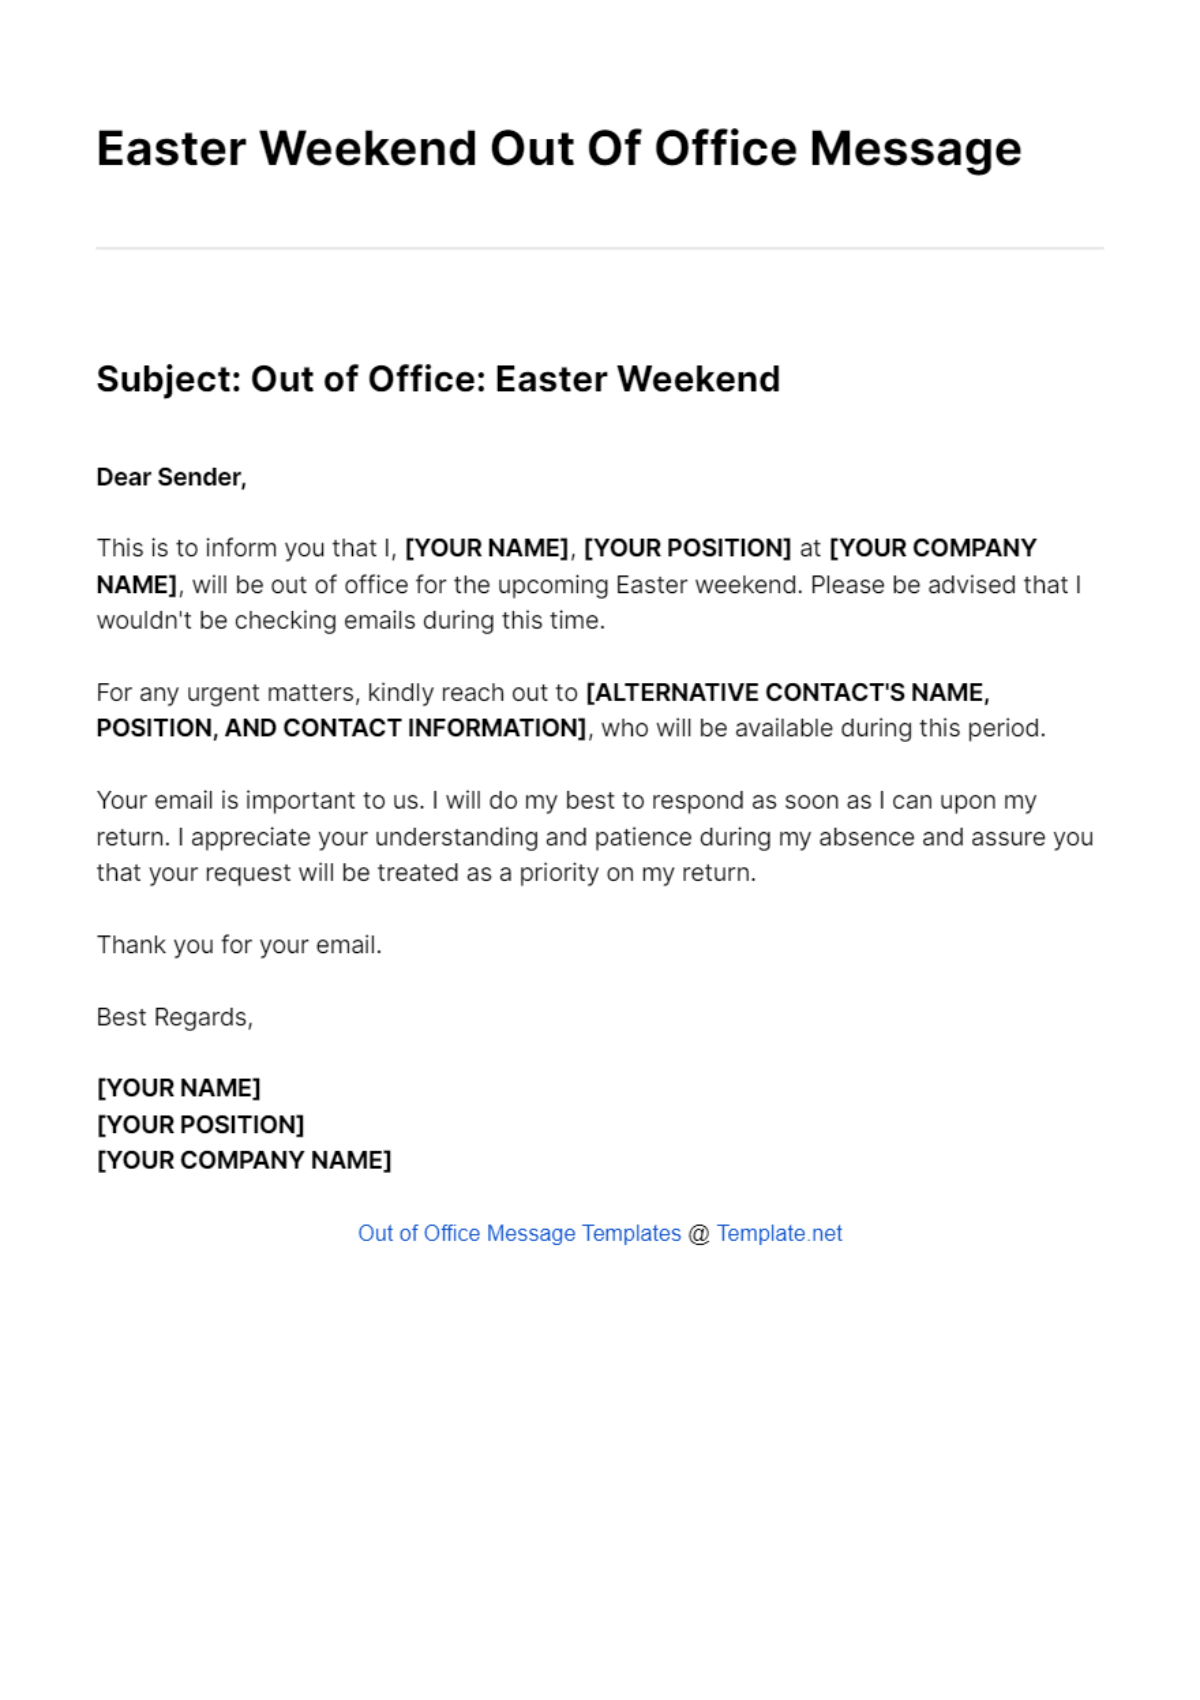 Free Easter Weekend Out Of Office Message Template